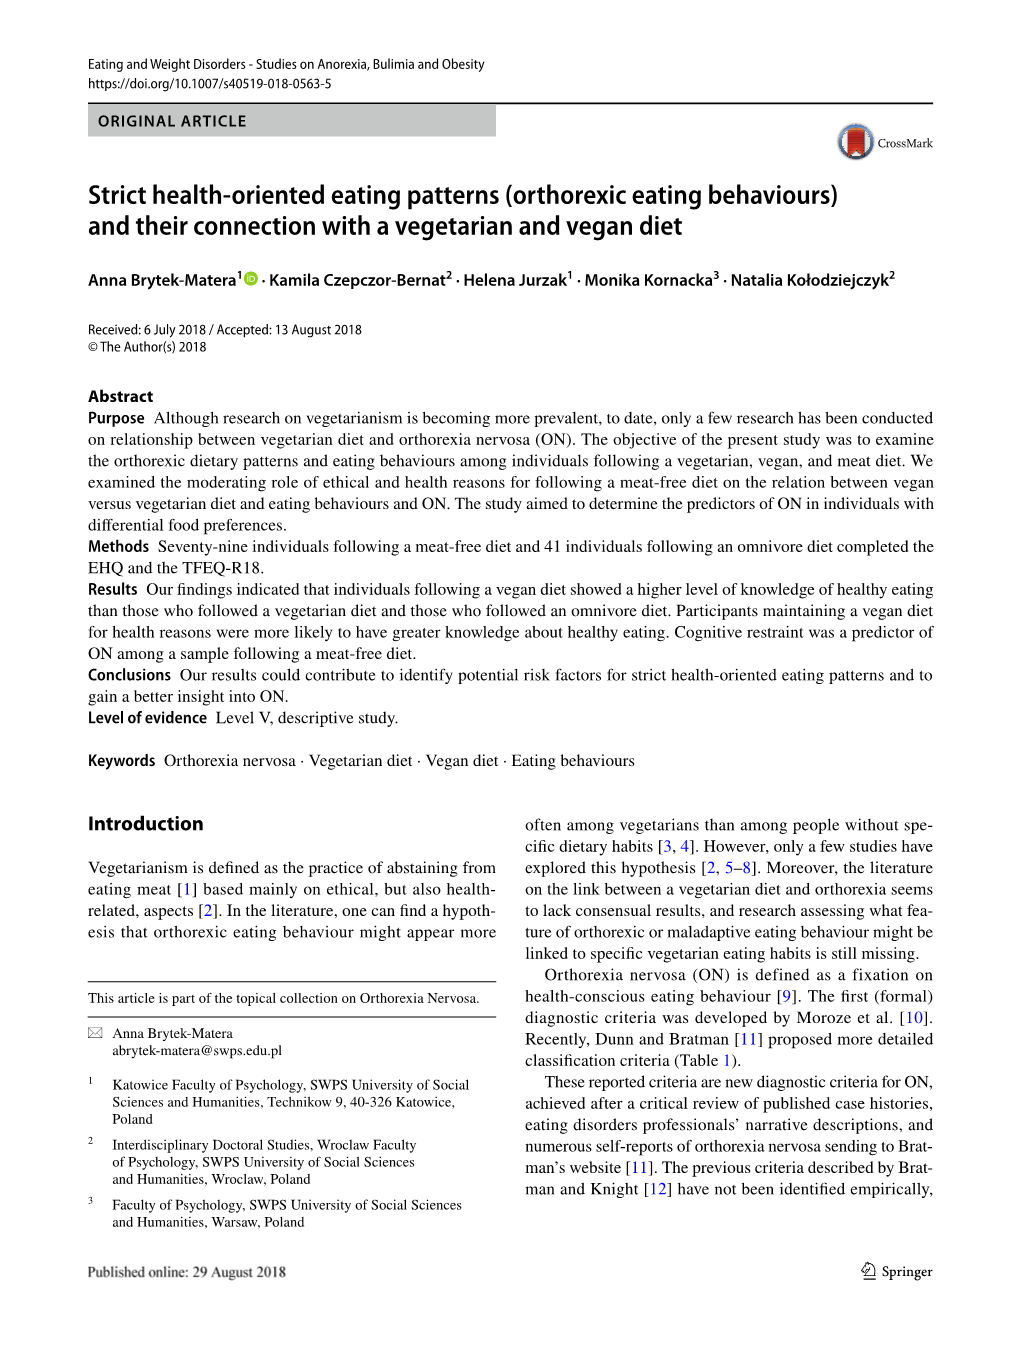 Strict Health-Oriented Eating Patterns (Orthorexic Eating Behaviours) and Their Connection with a Vegetarian and Vegan Diet